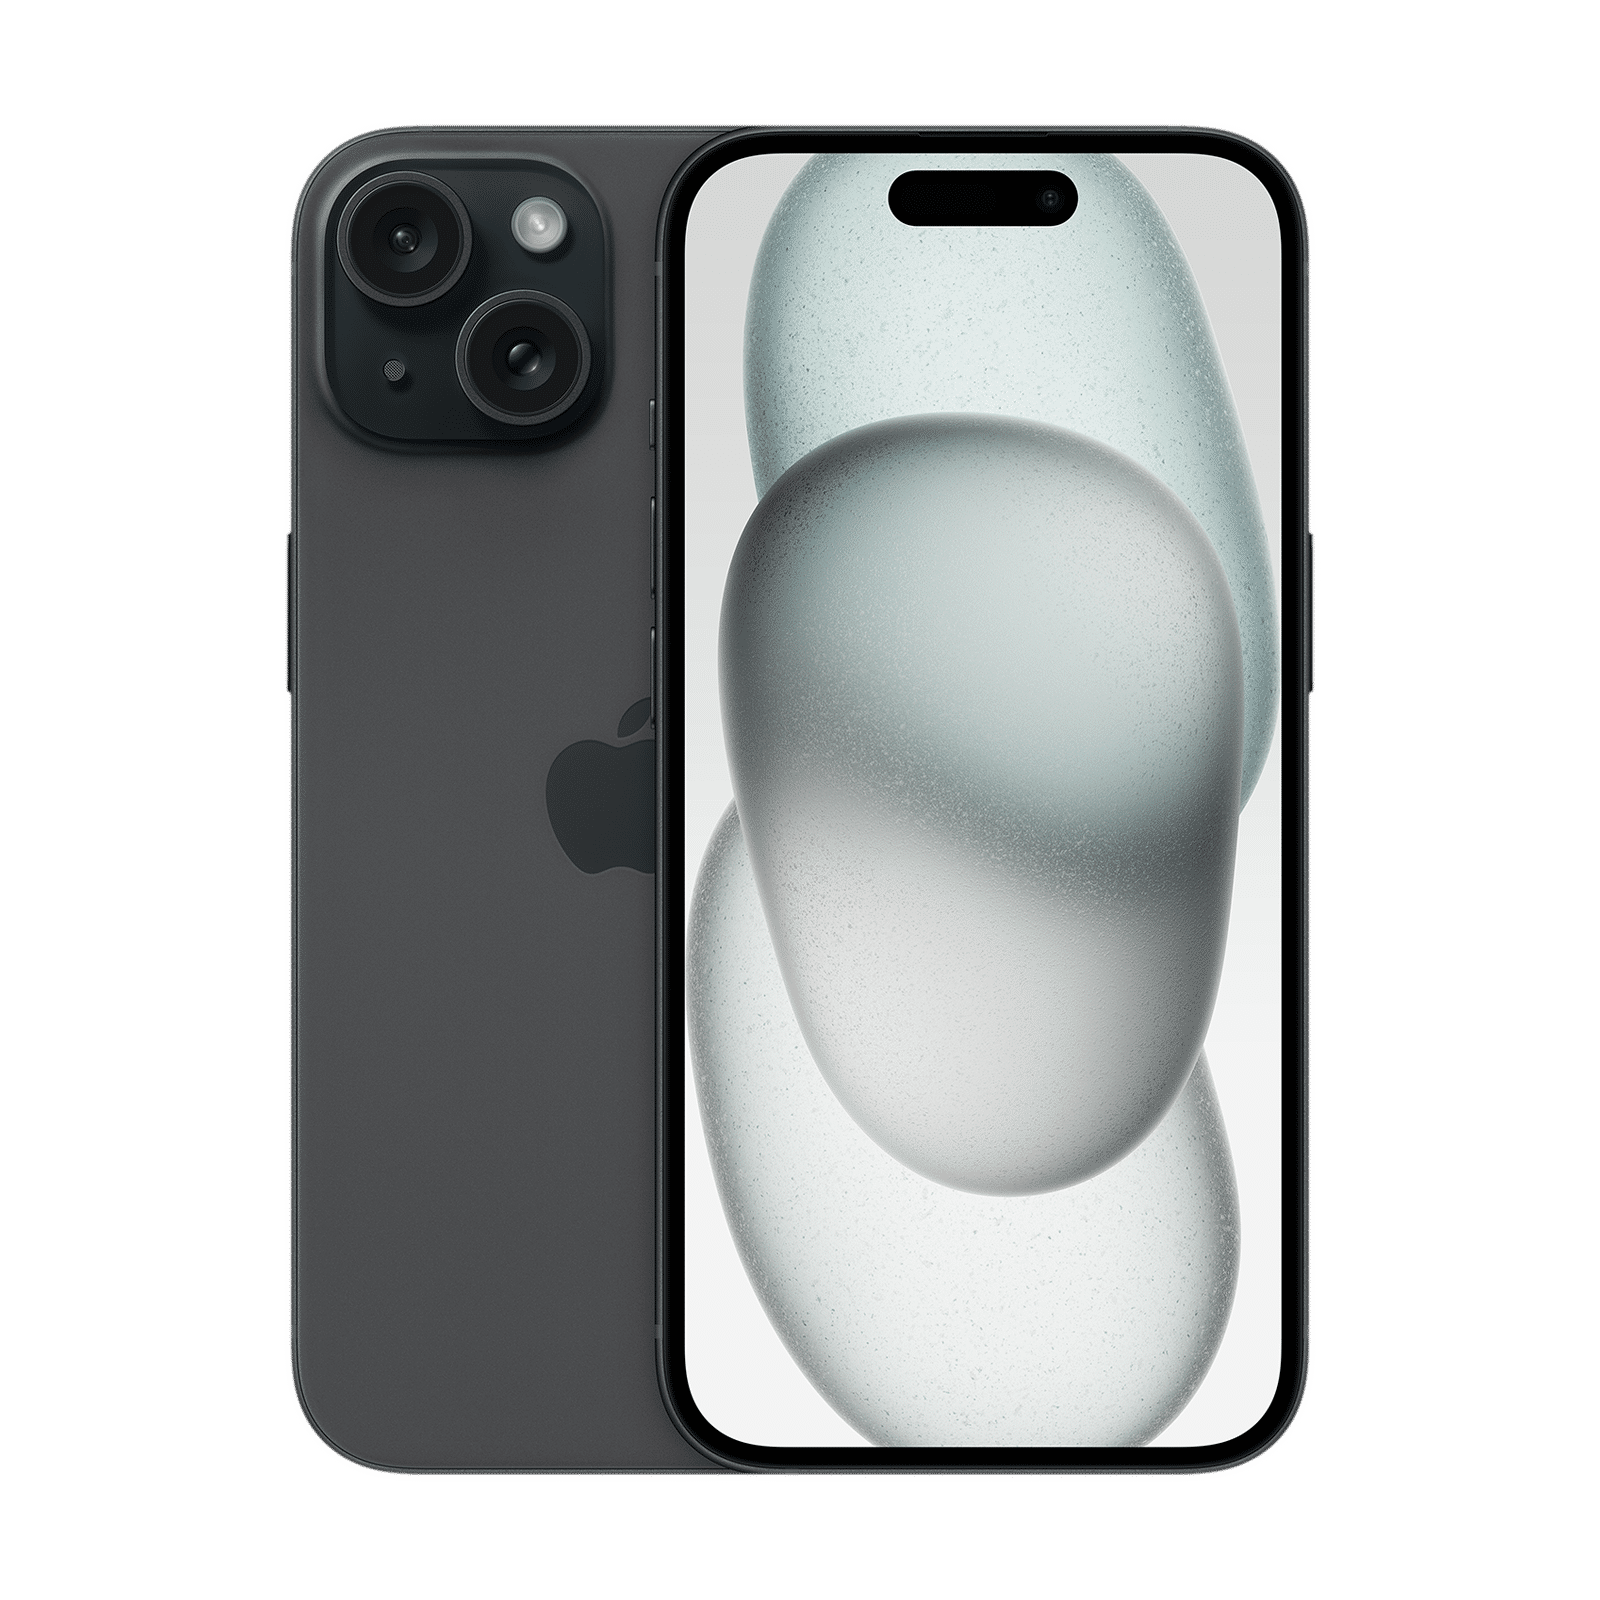 iPhone X or iPhone 8? Price, size, camera all factor in your buying  decision